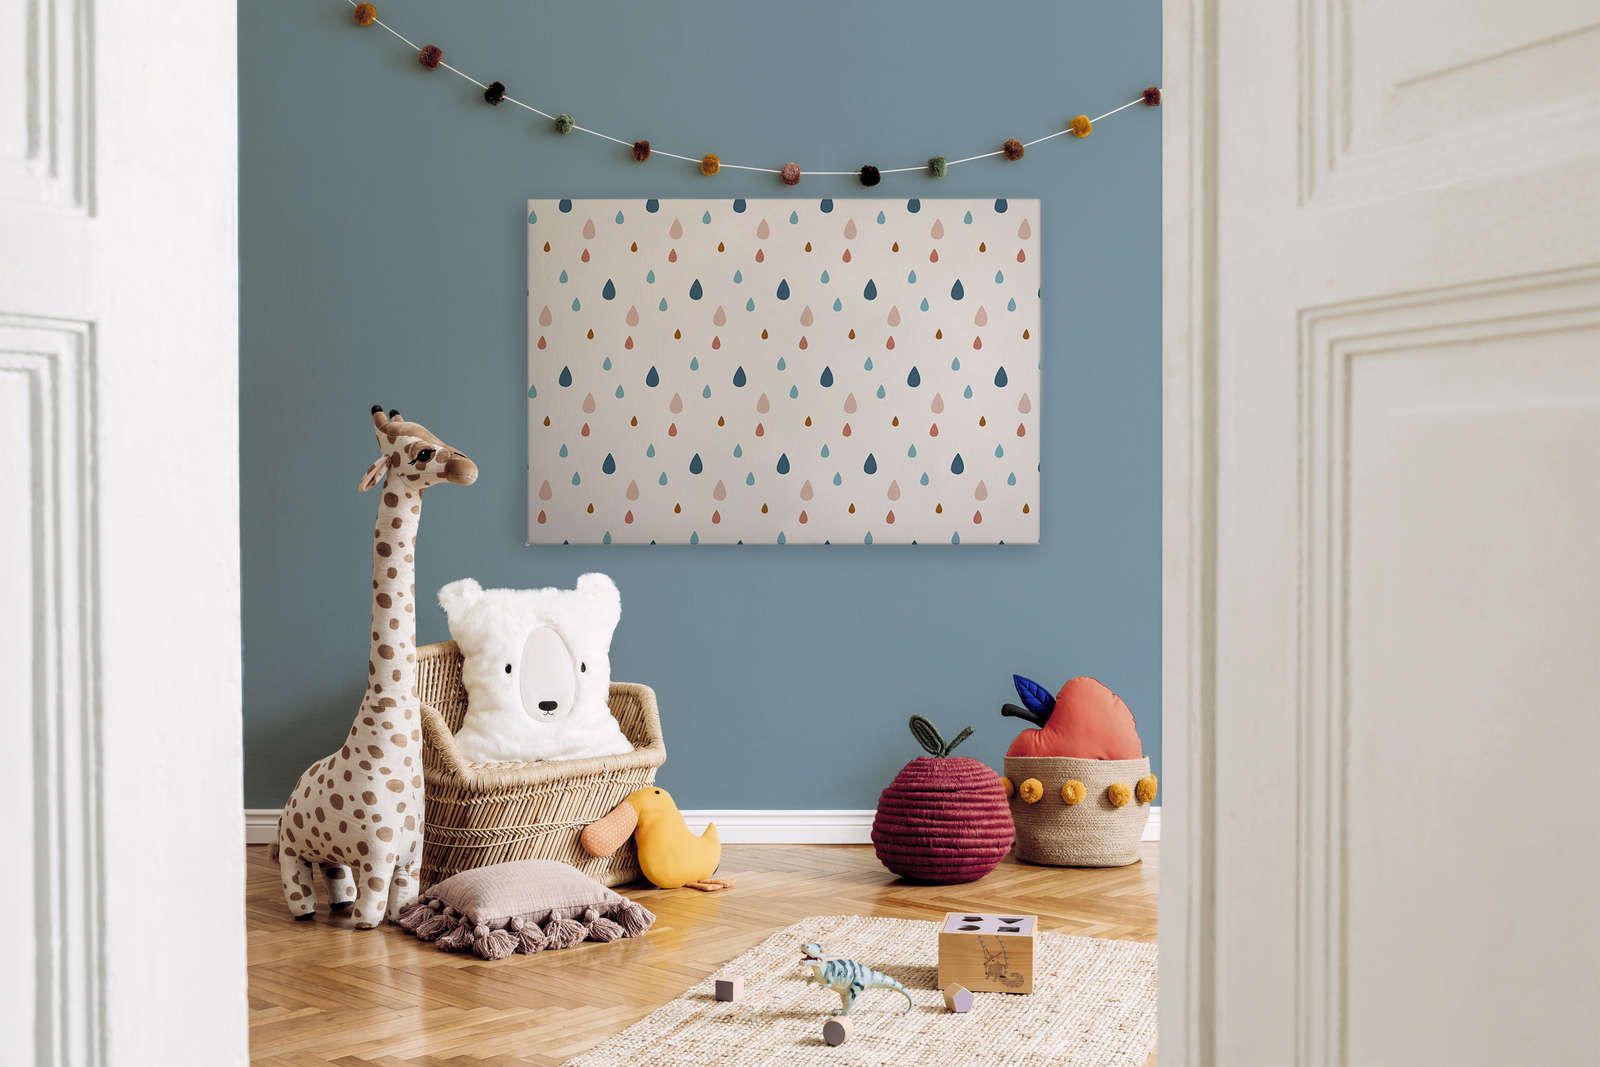             Canvas for children's room with colourful water drops - 120 cm x 80 cm
        